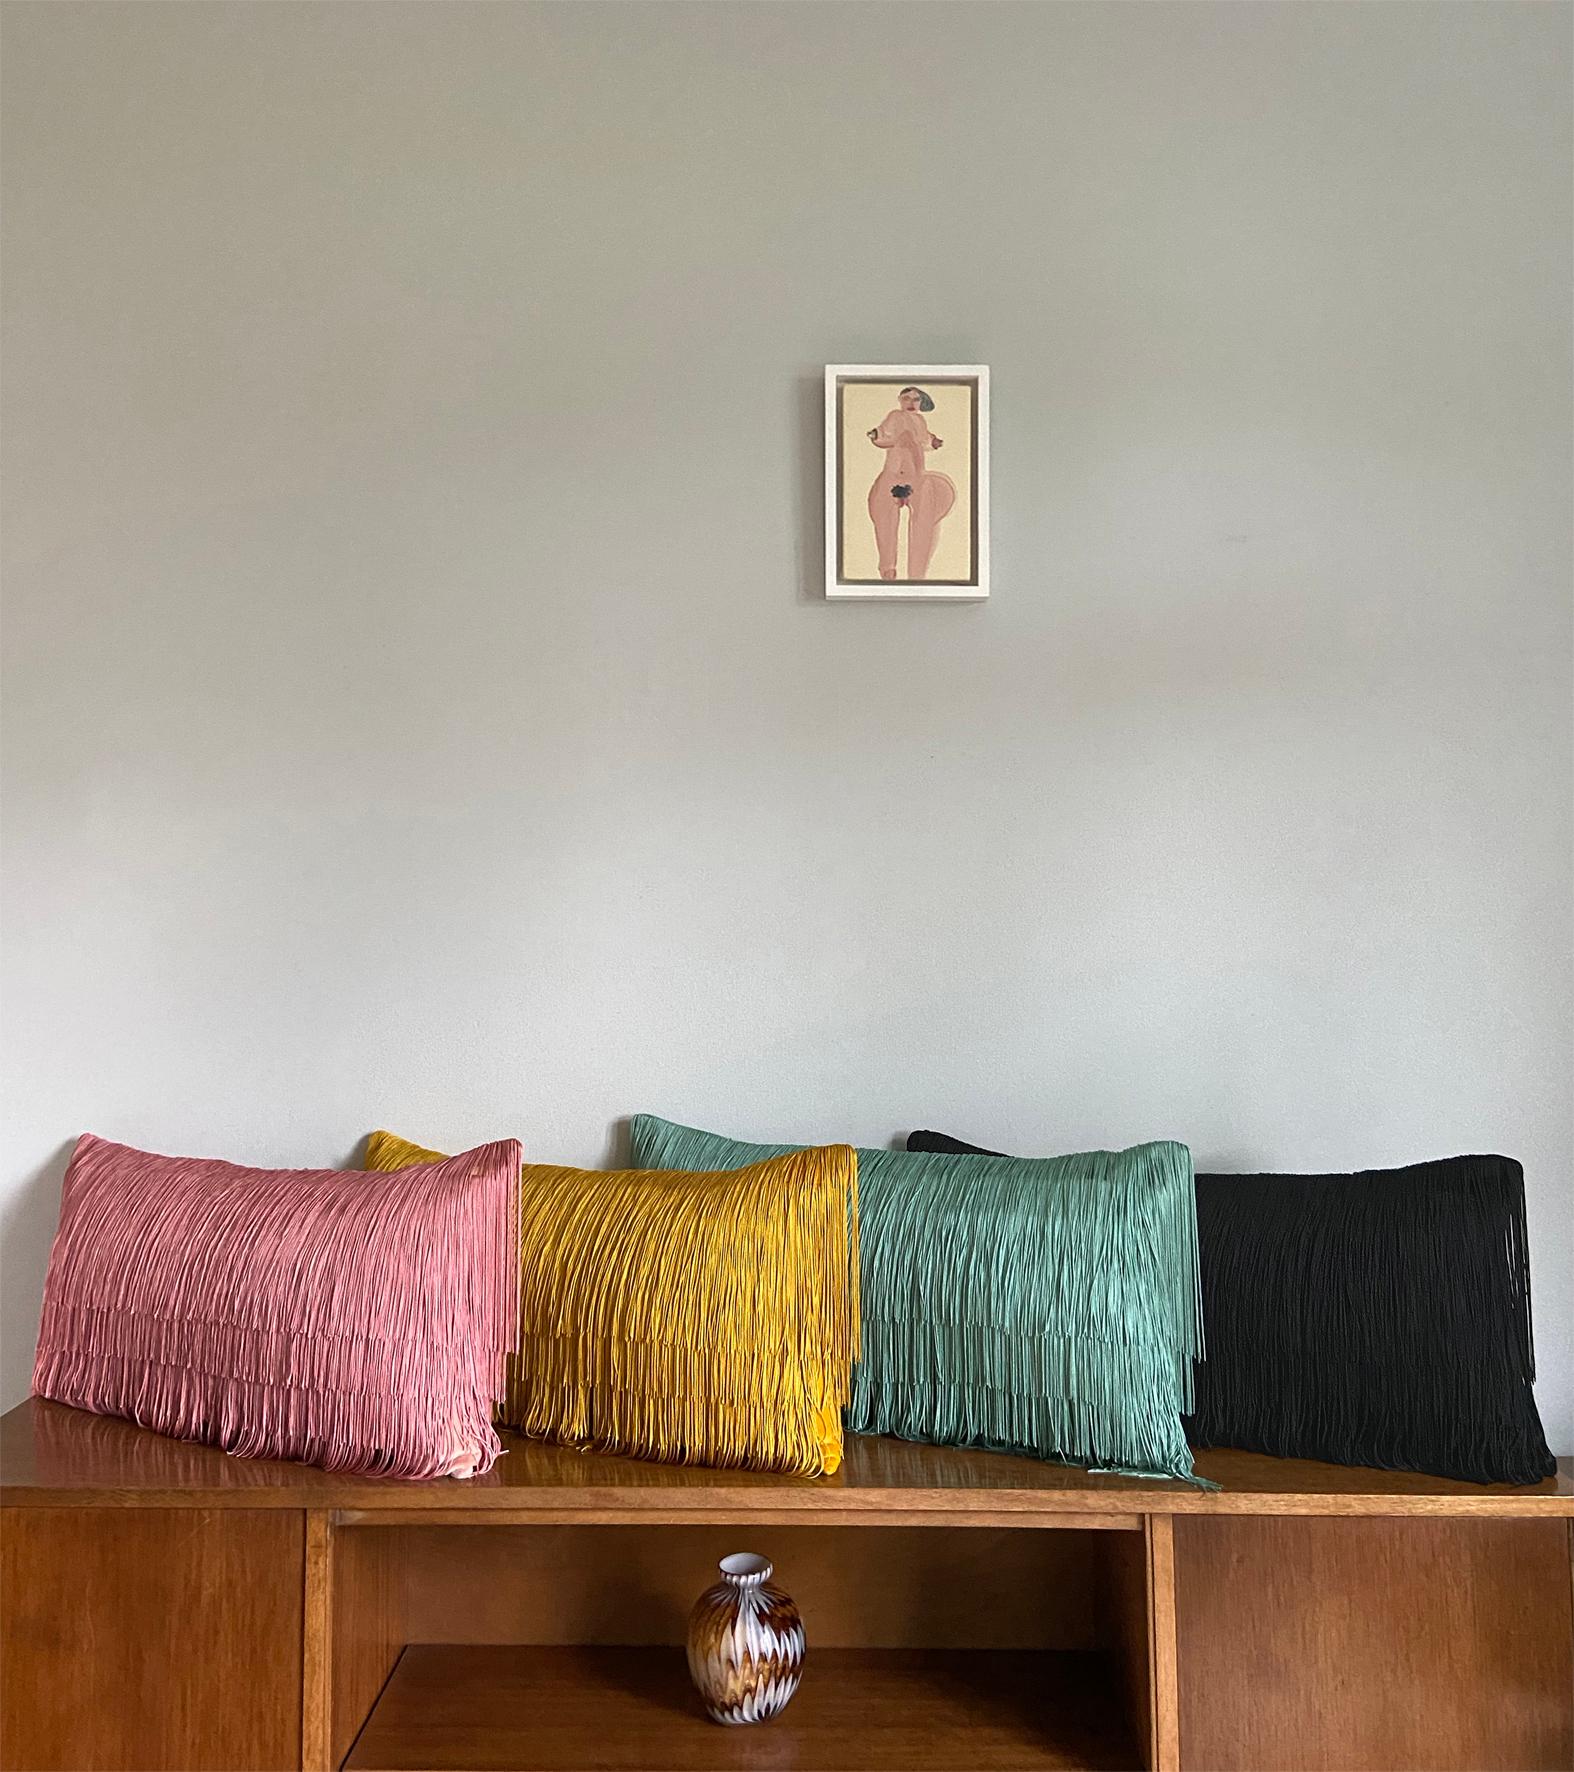 In a sumptuous black, our signature velvet tassel cushion will make the ultimate decorative statement in your home. Whether you’re a maximalist adding to your many layers of décor or a minimalist wanting to make an impact this cushion does the